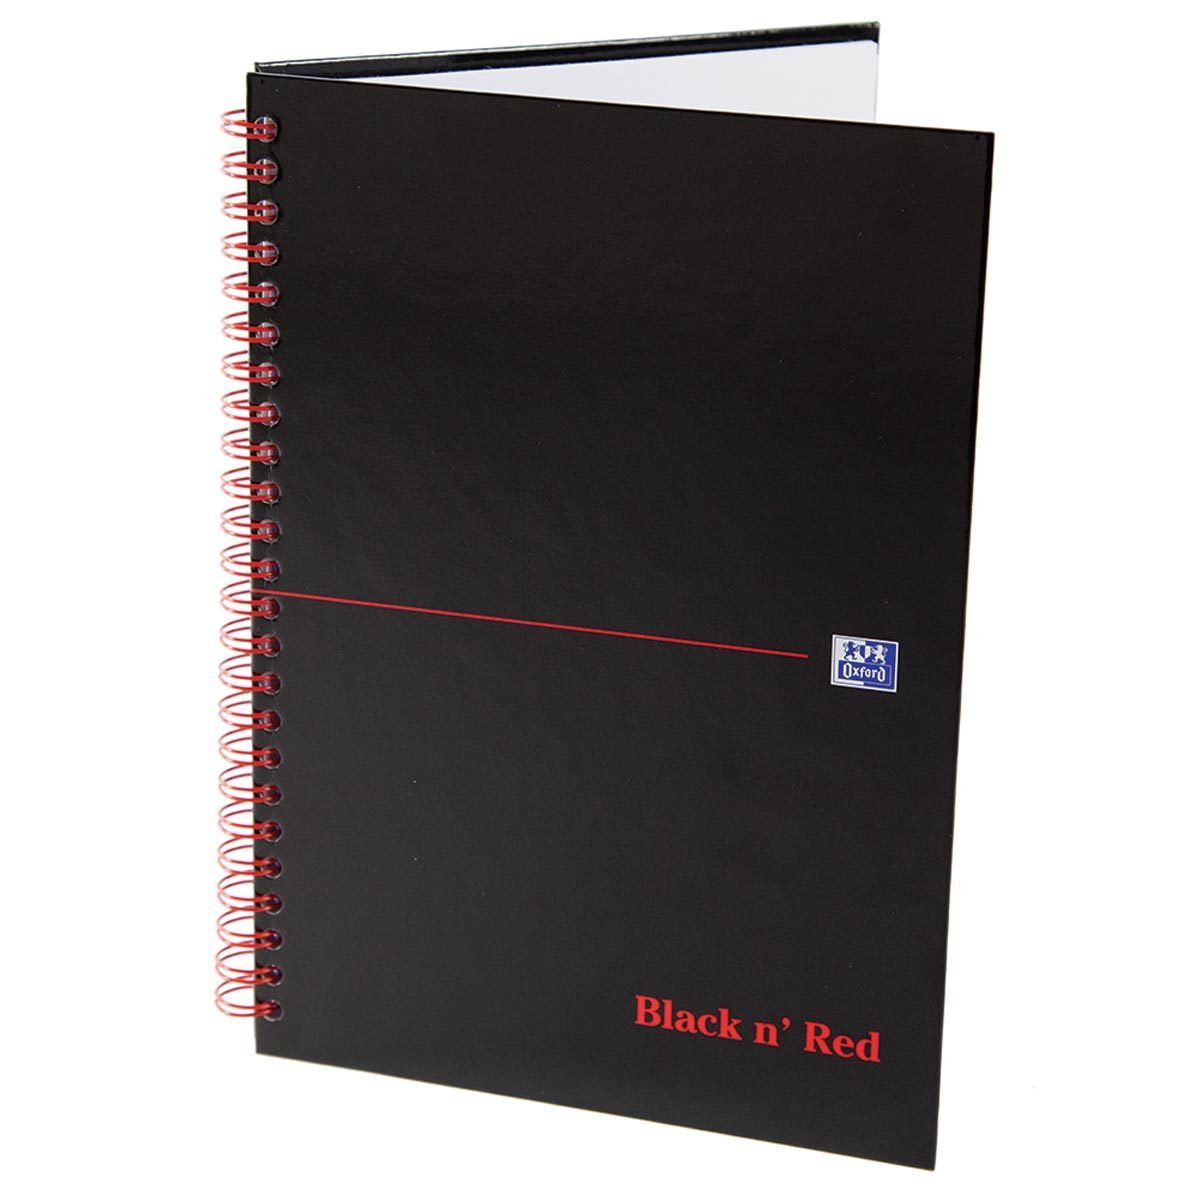 Black n Red A5 Wirebound Notebook 90gsm 140 pages - Pack of 10